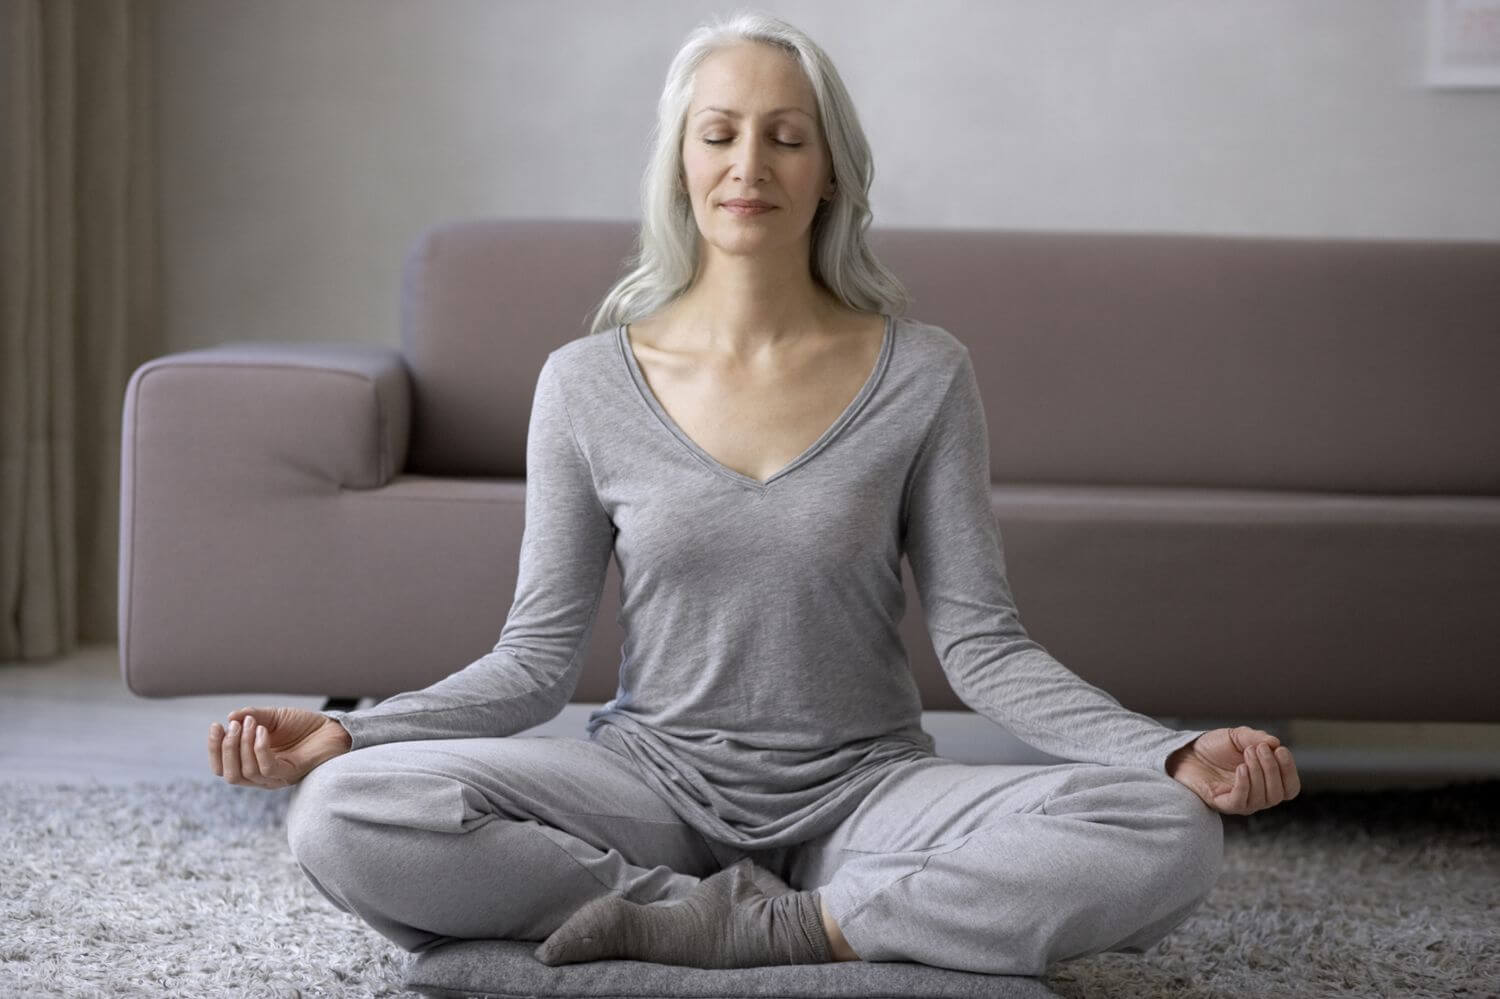 An older woman meditates in her living room.